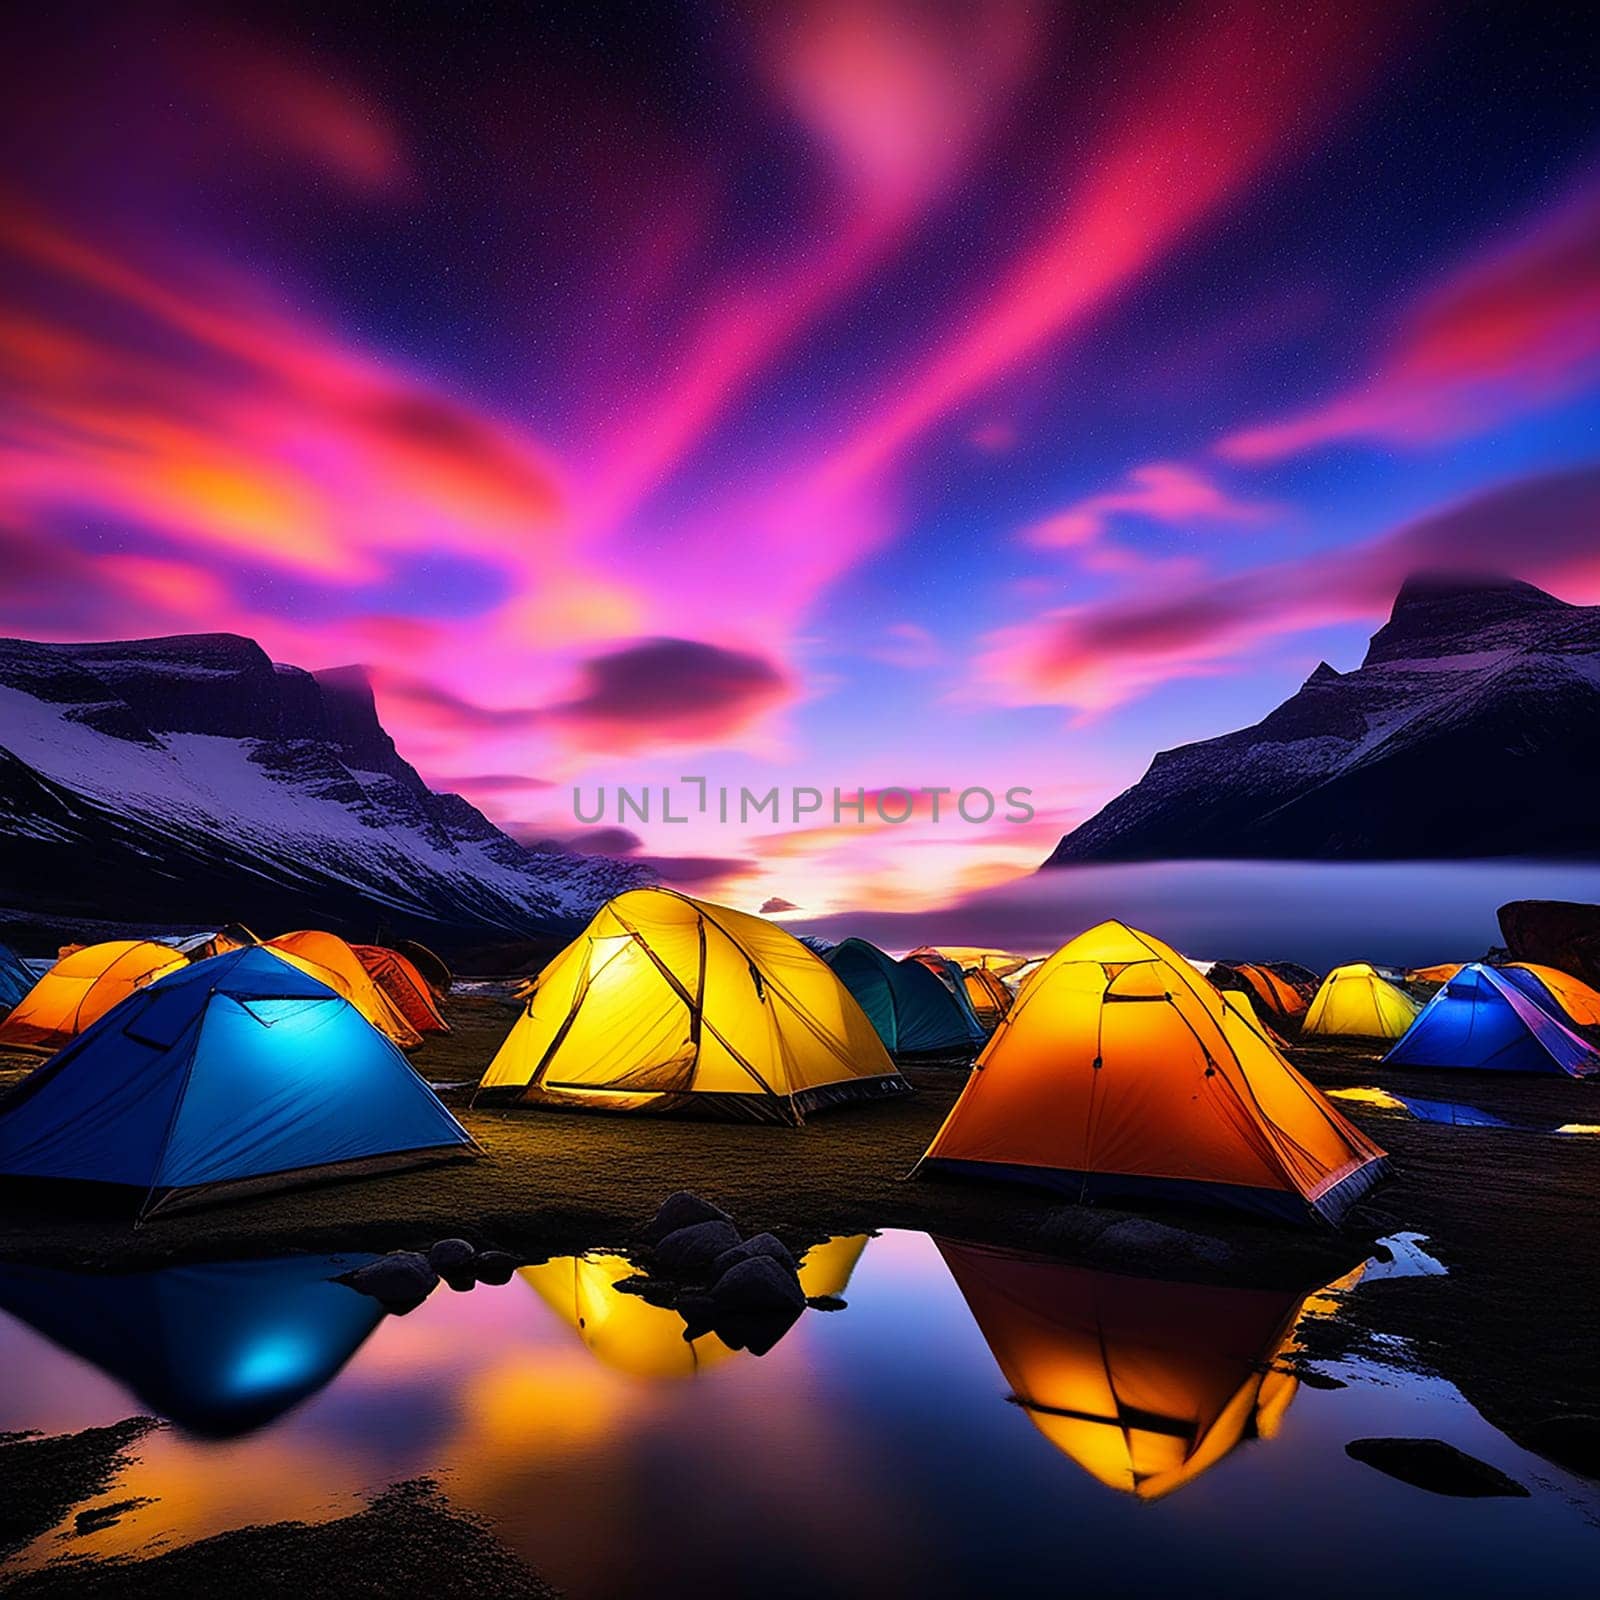 Under the Northern Lights: Tent Camping and Aurora Experience"